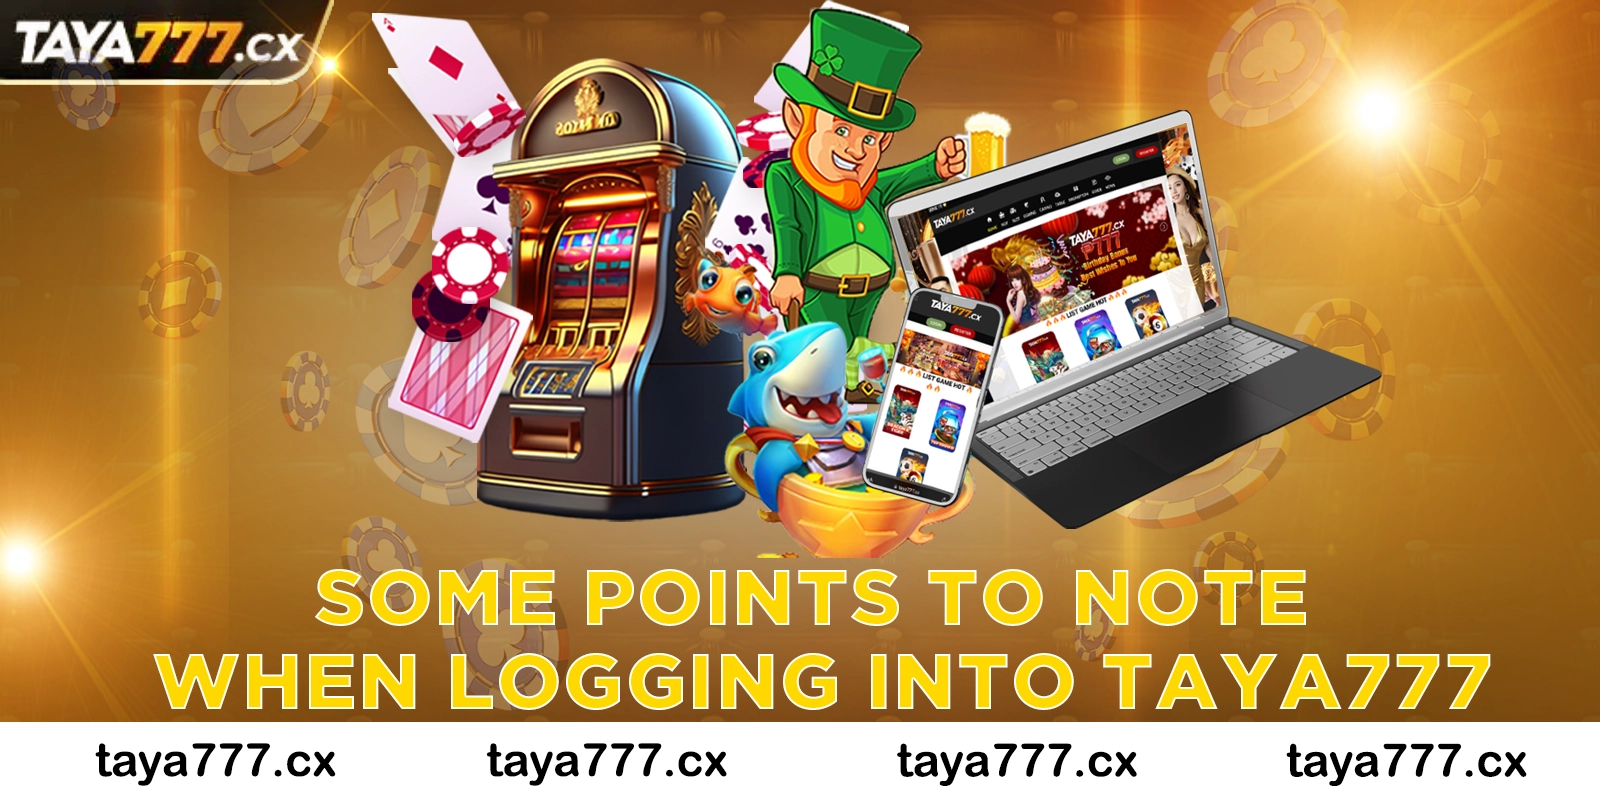 Some points to note when logging into Taya777